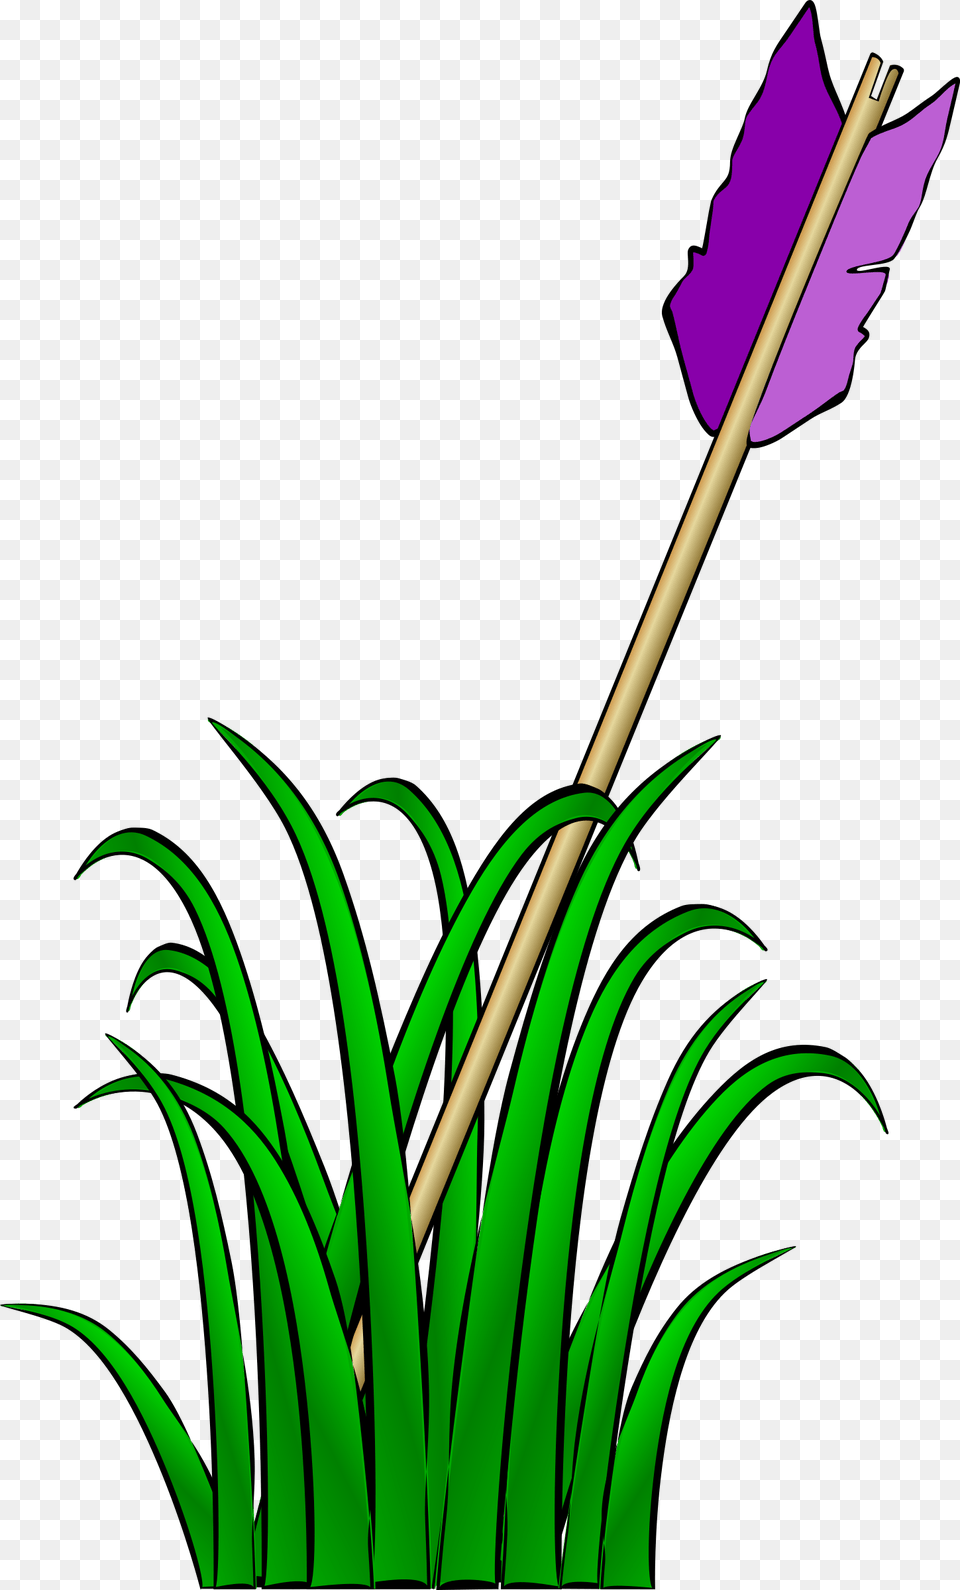 Arrow In The Grass Icons, Plant, Weapon, Spear Png